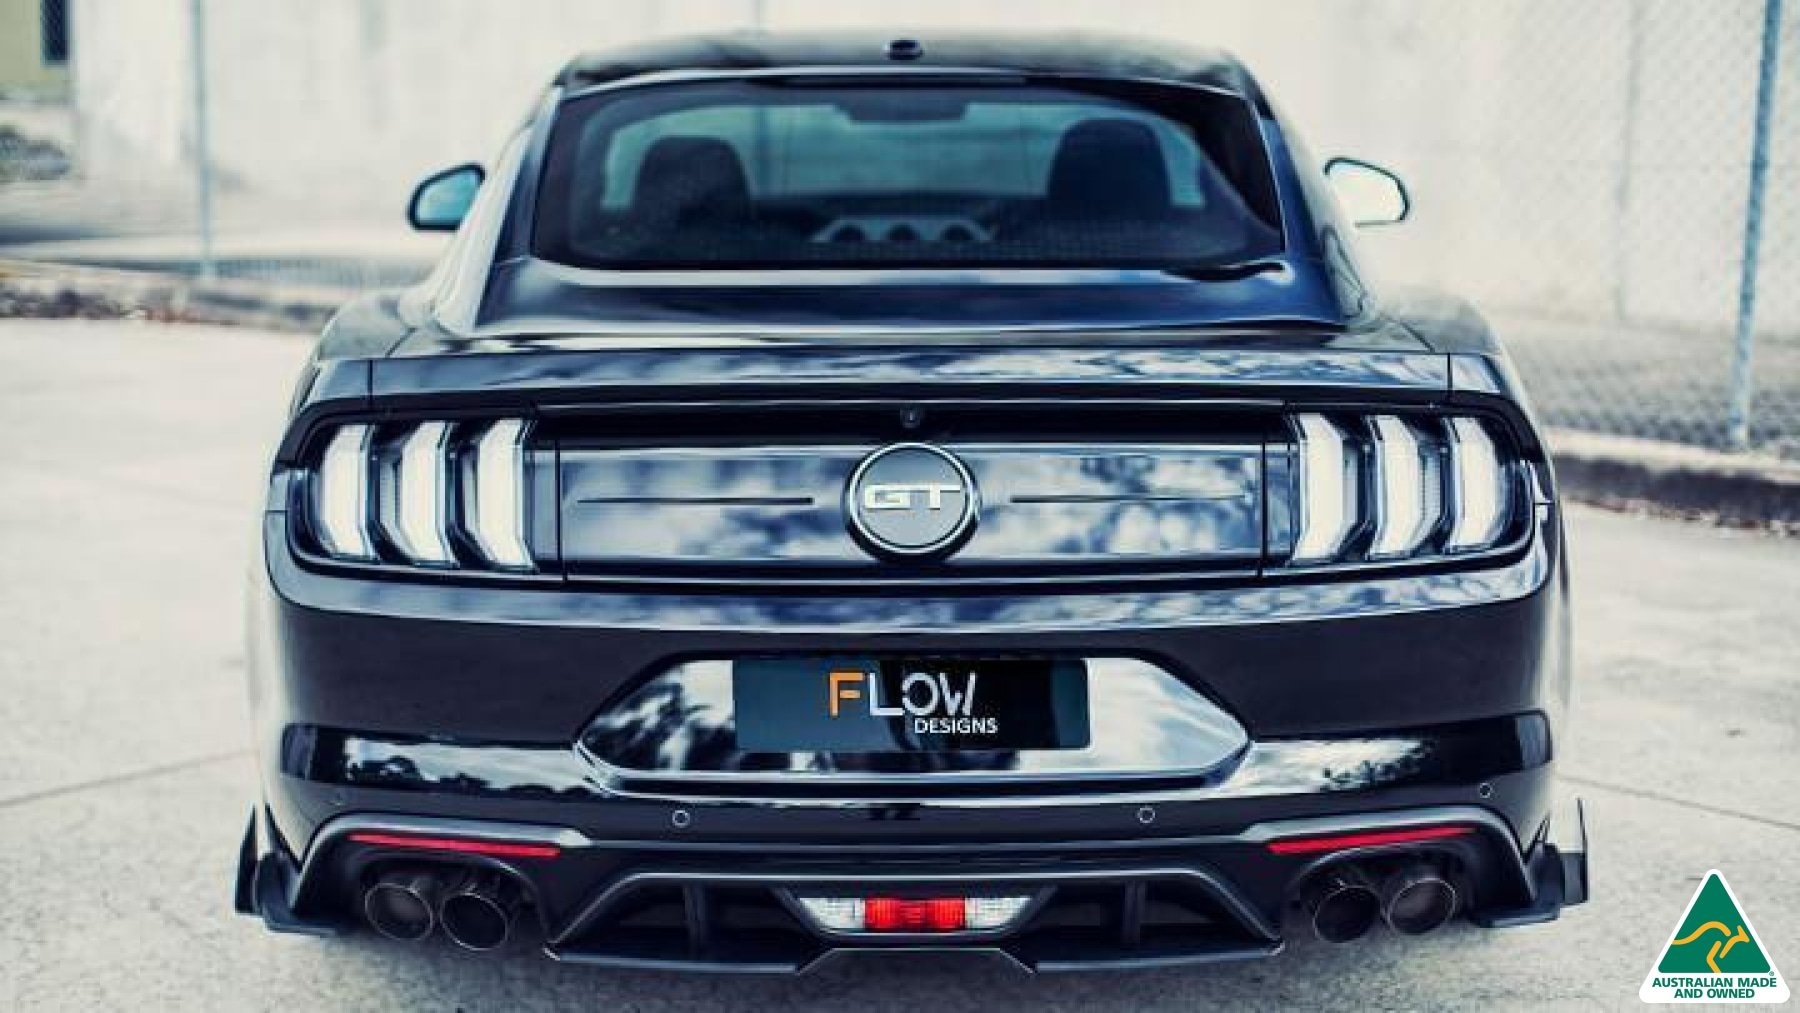 GT Mustang S550 FN Full Lip Splitter Set - All Accessories - MODE Auto Concepts